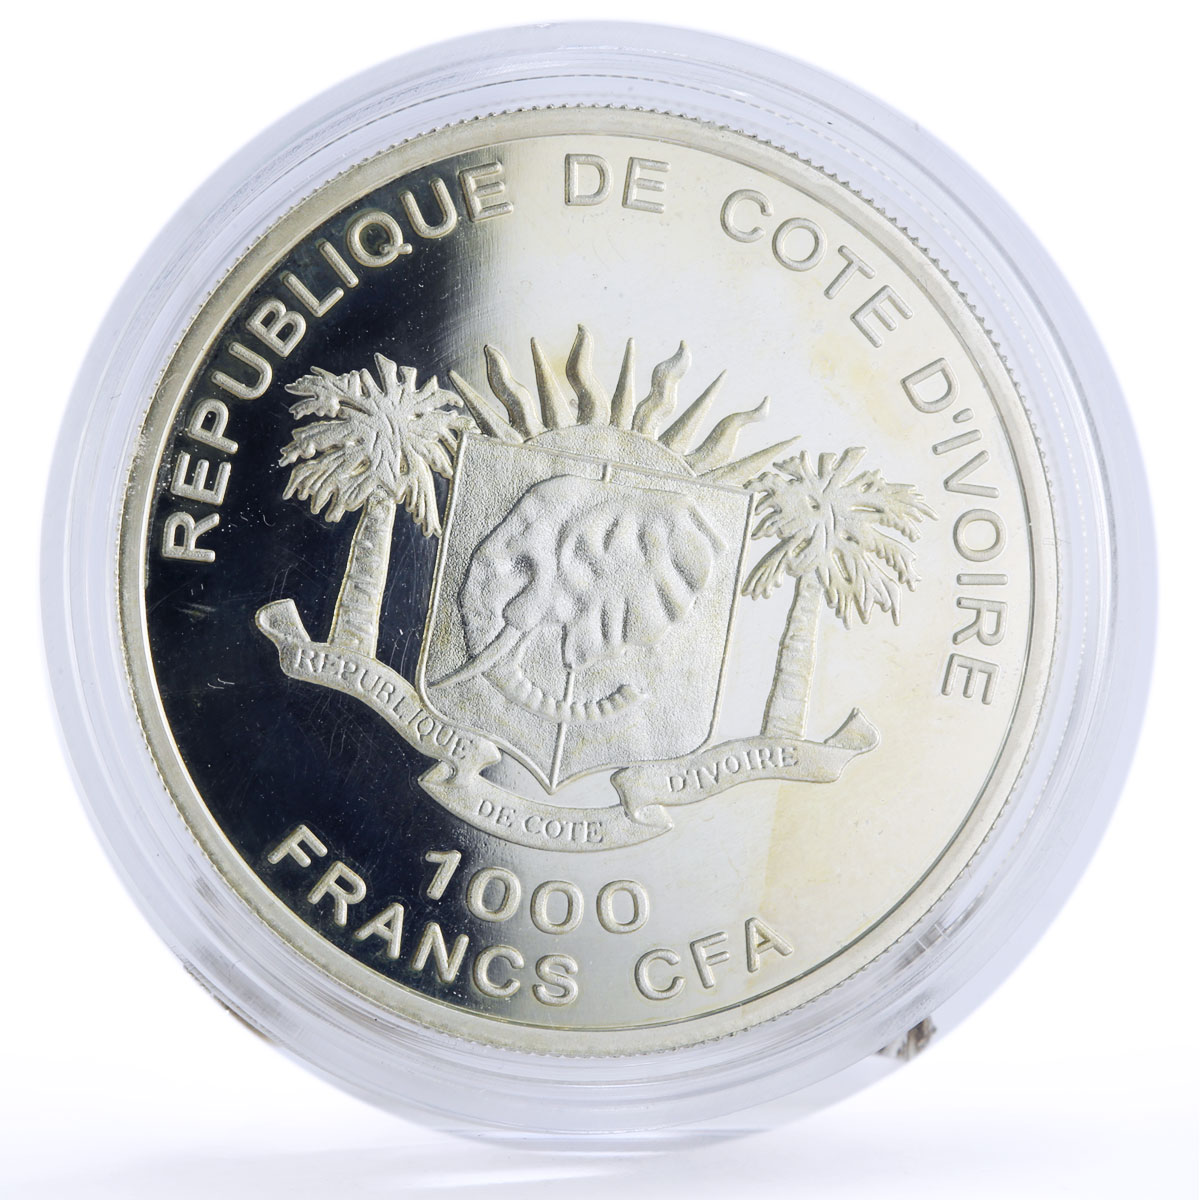 Ivory Coast 1000 francs Seafaring HMS Bounty Ship Clipper proof silver coin 2008